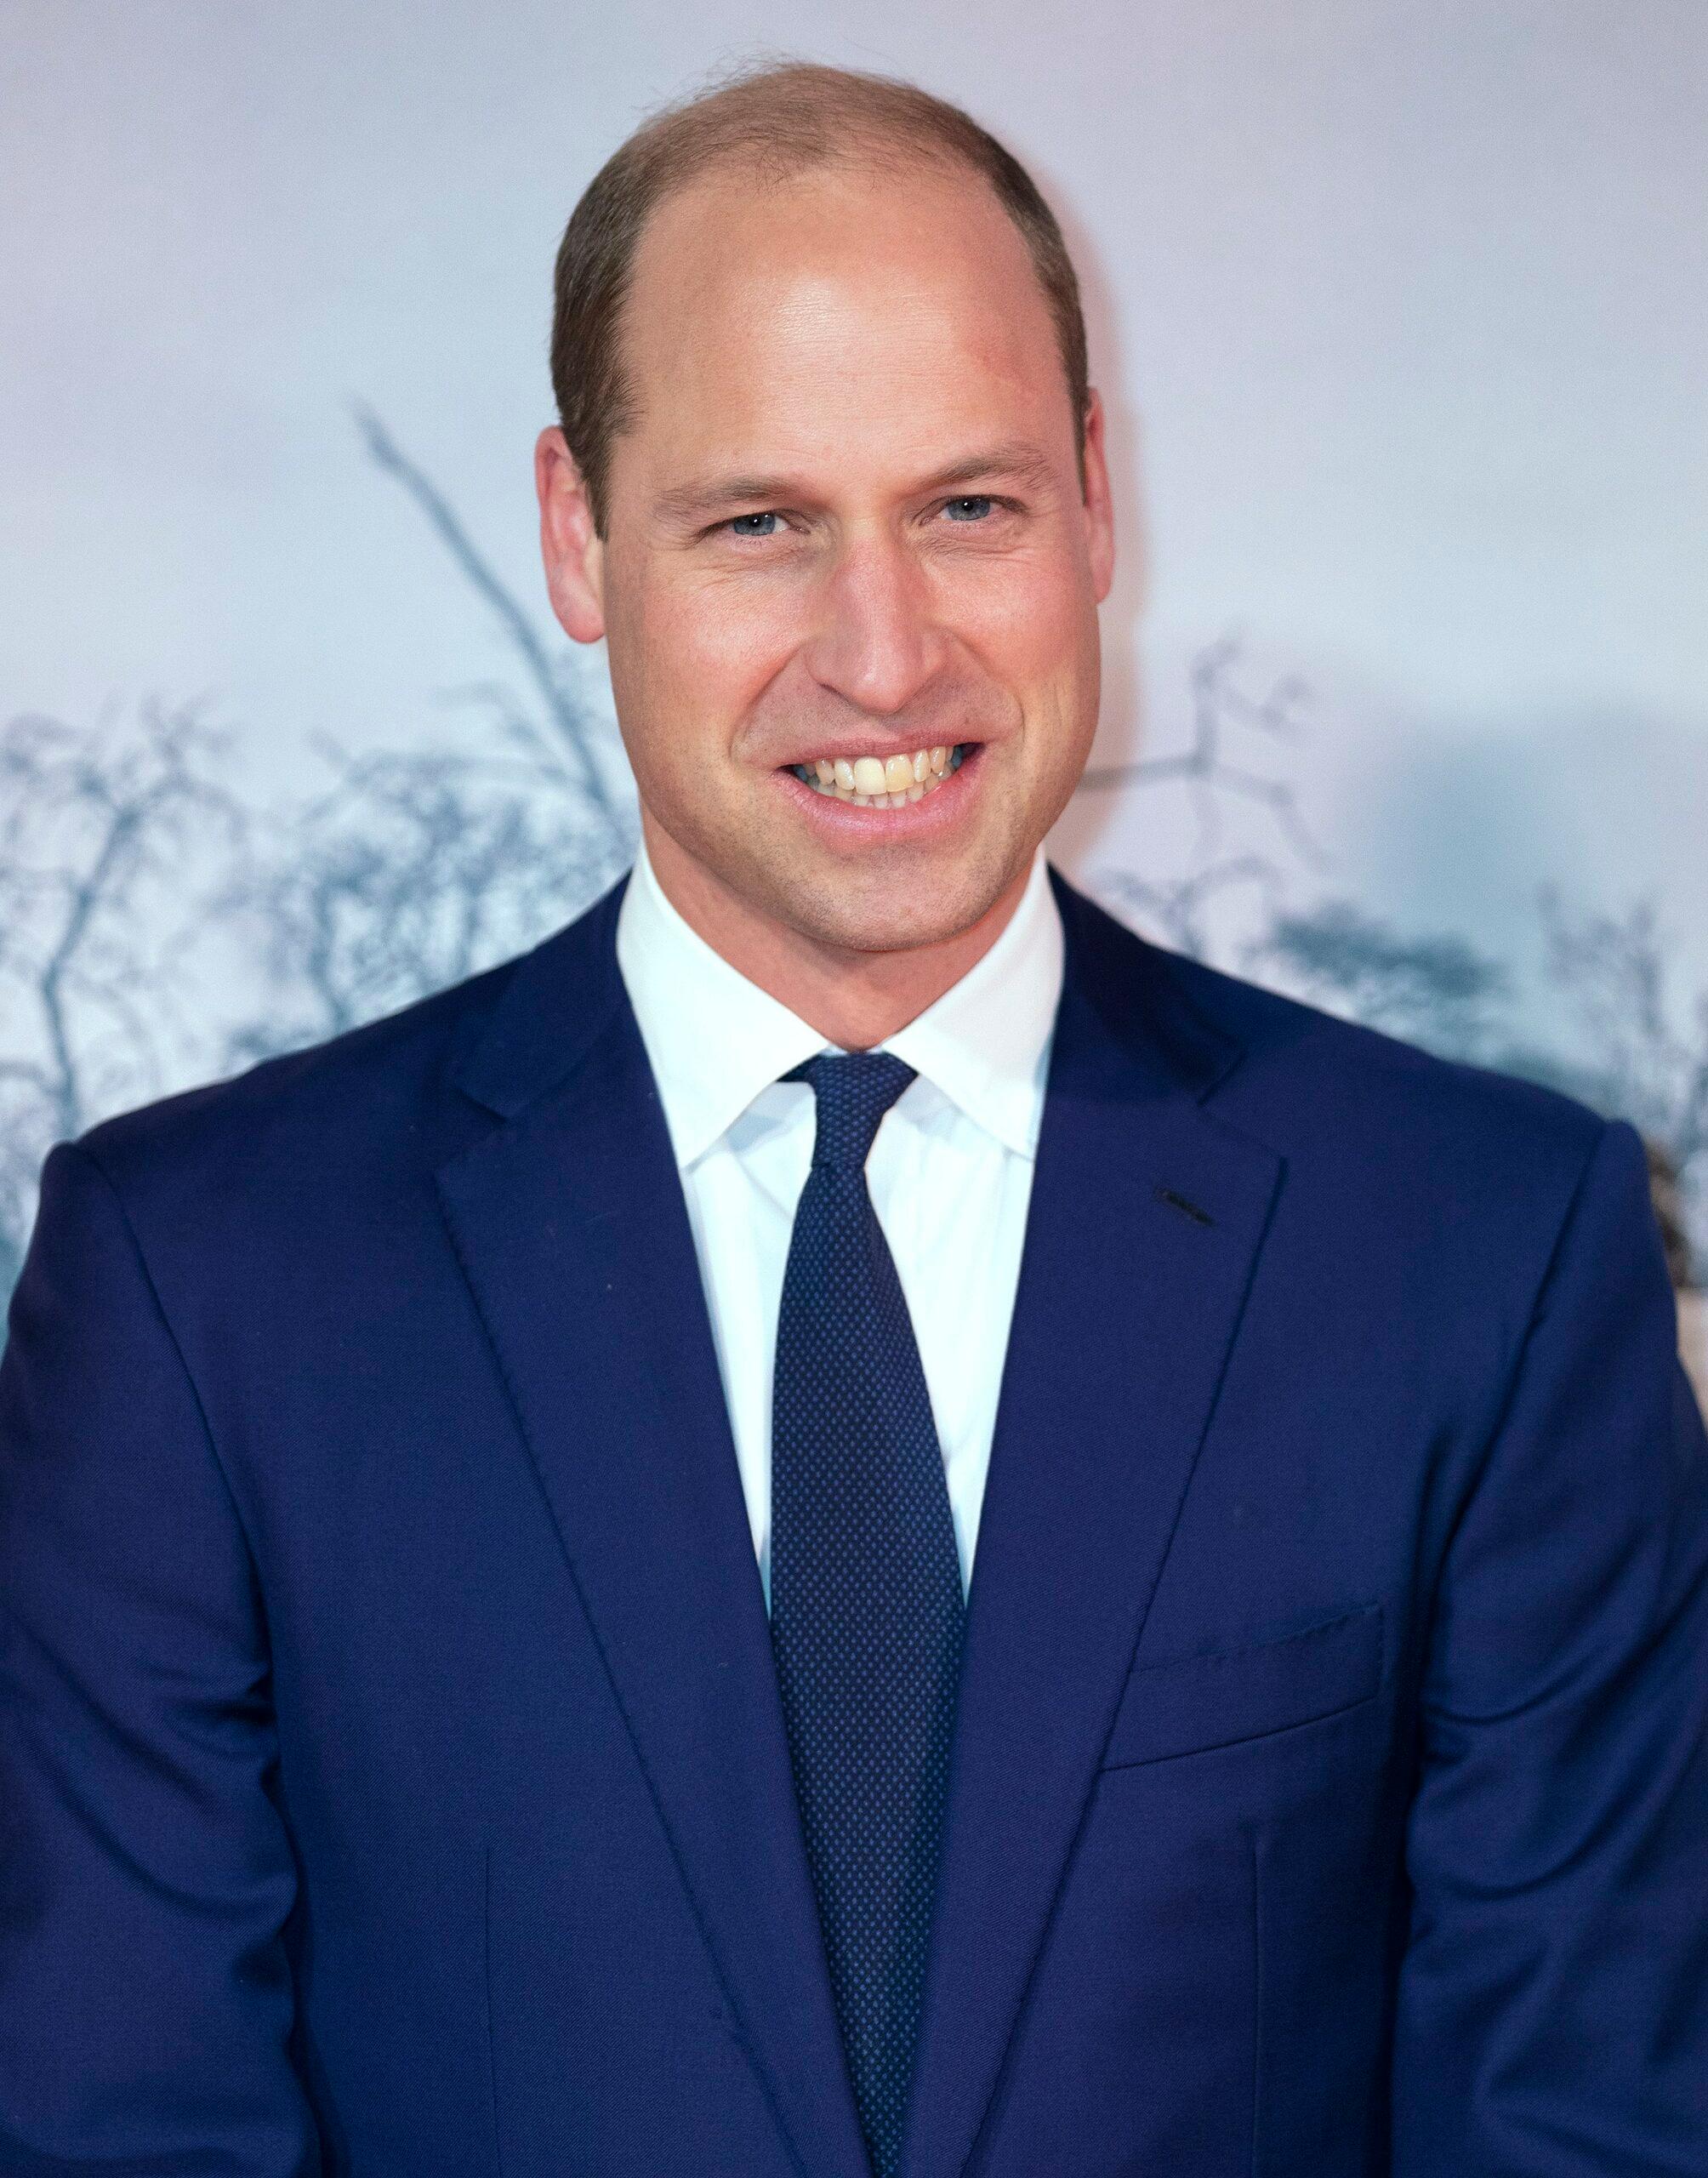 The Duke of Cambridge attends the Tusk Conservation Awards